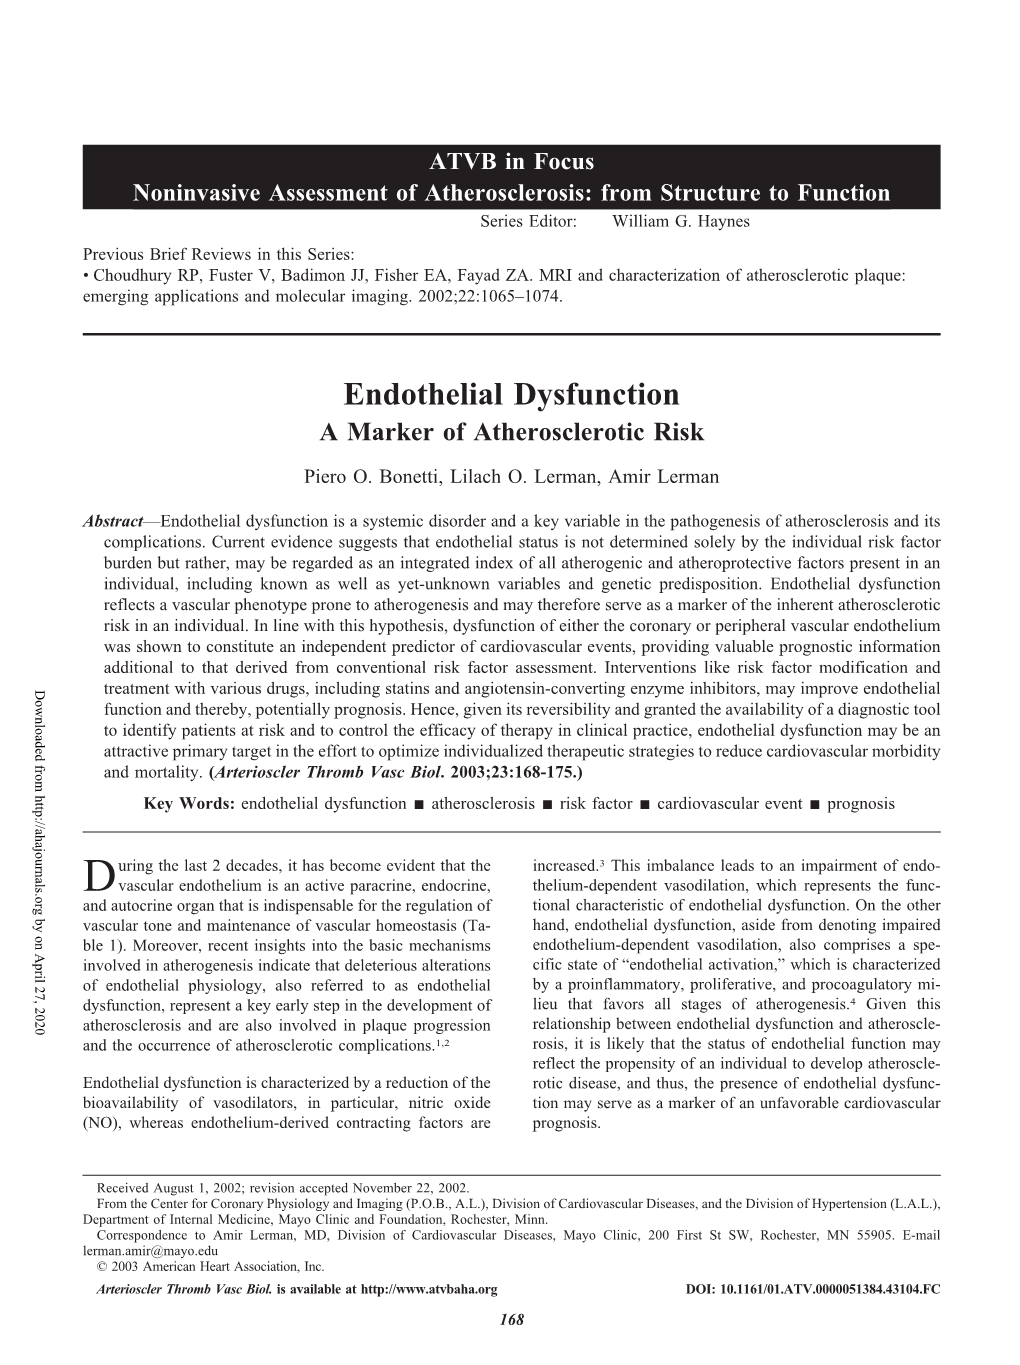 Endothelial Dysfunction a Marker of Atherosclerotic Risk